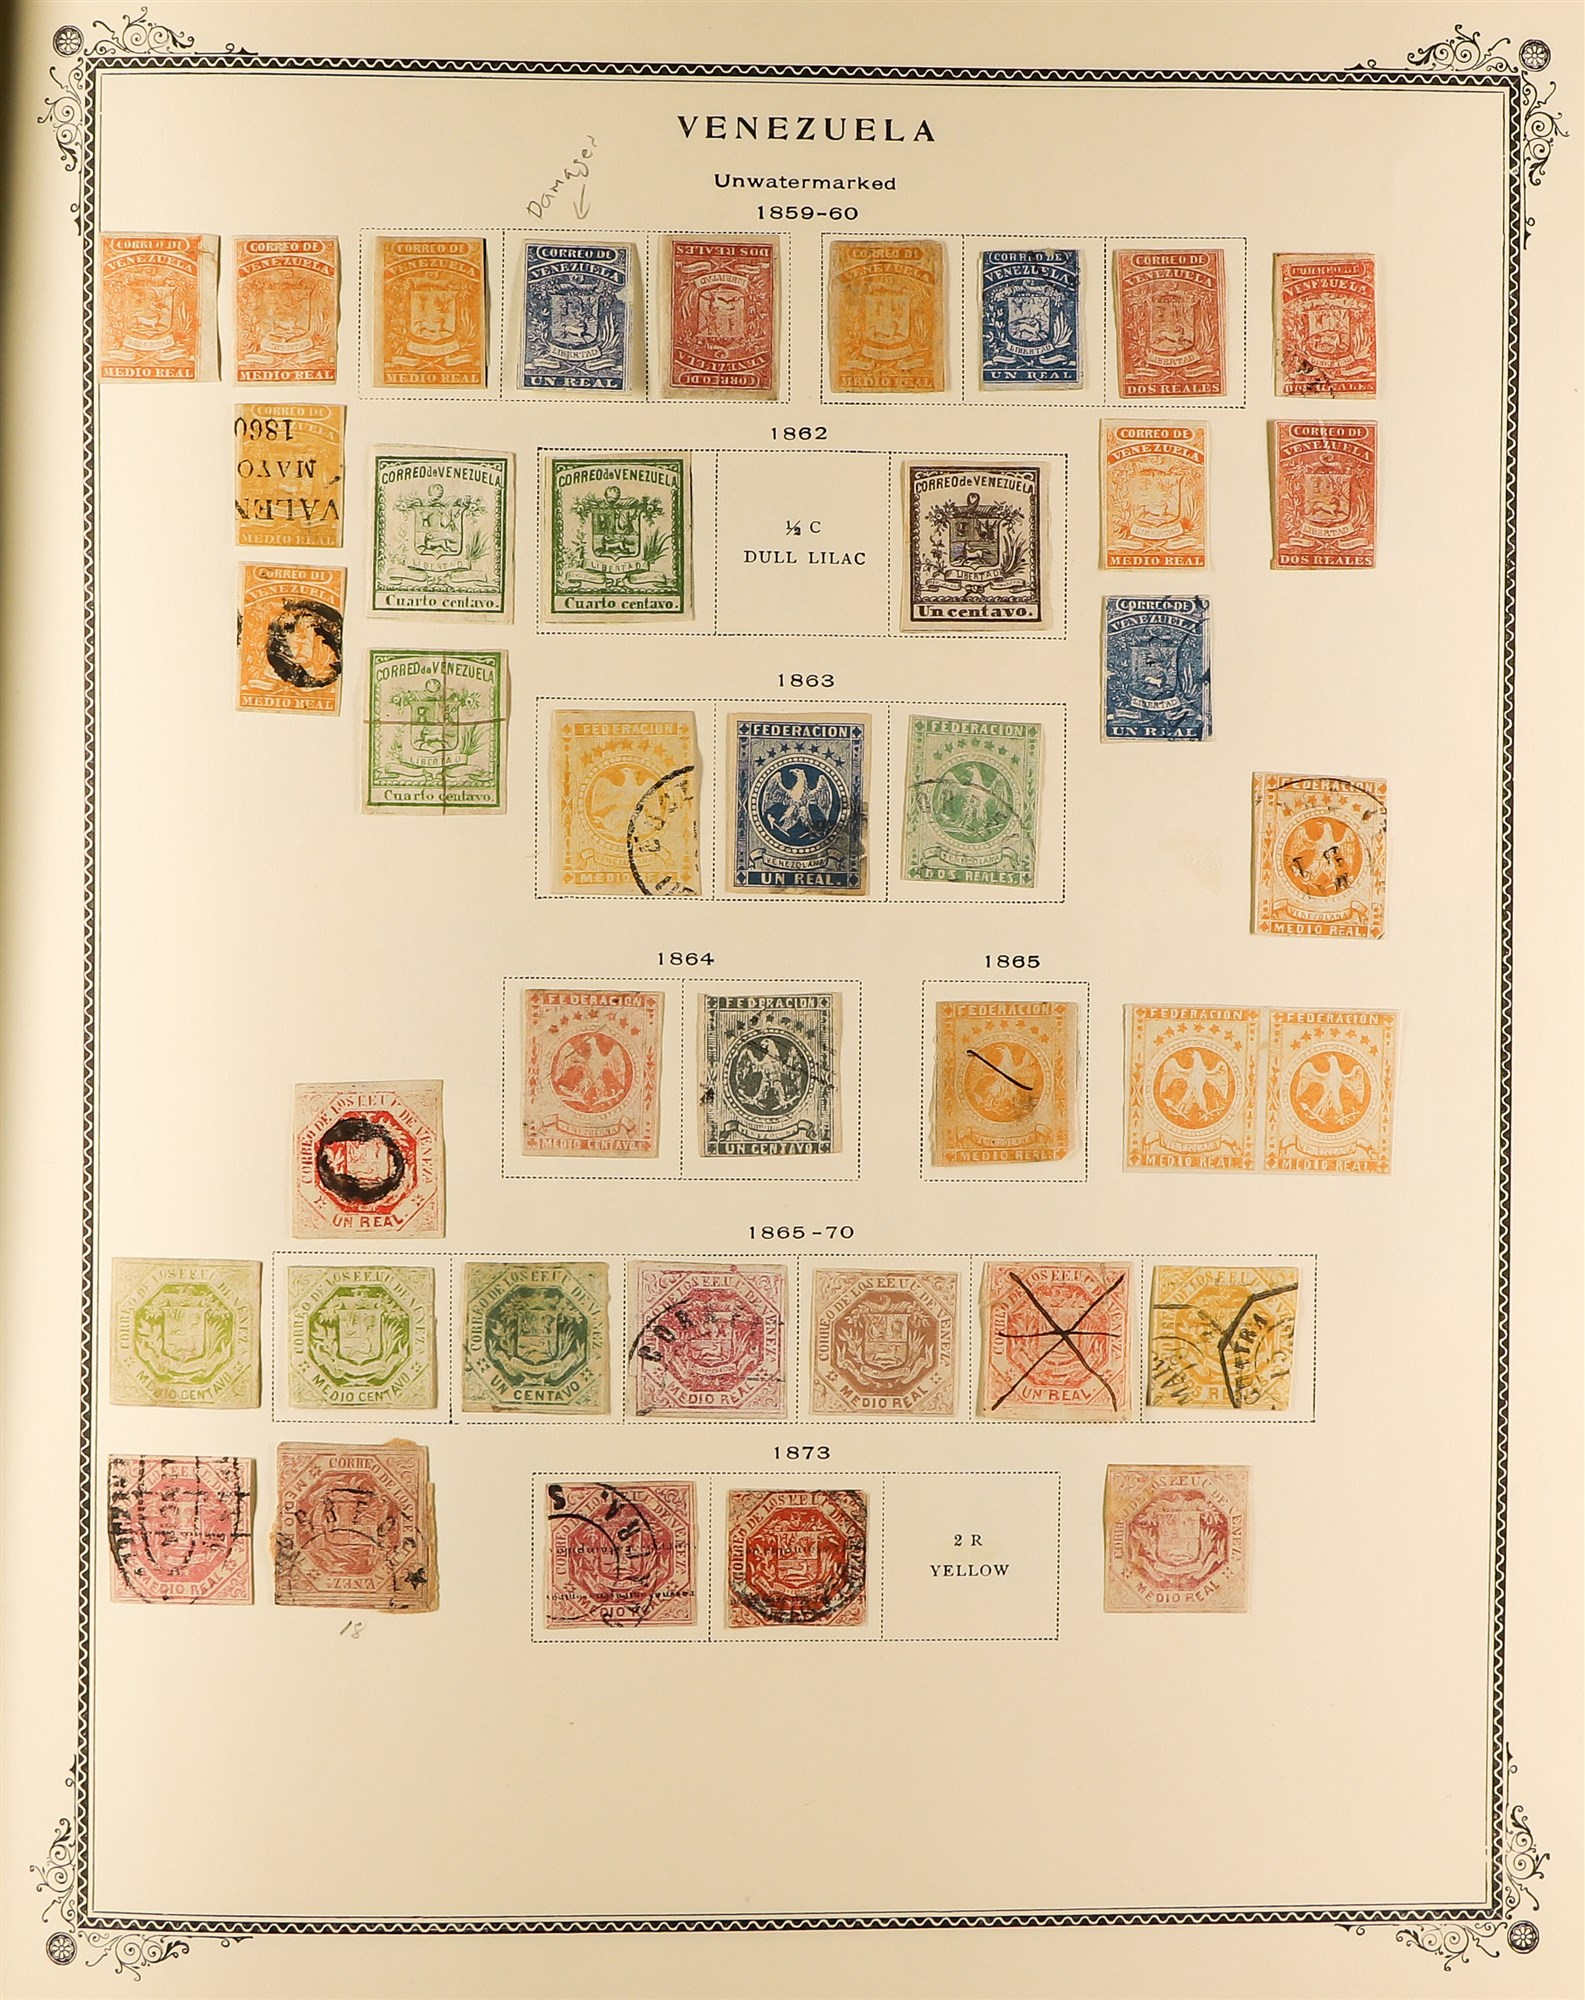 VENEZUELA 1859 - 1976 COLLECTION of 1500+ mint & used stamps in album, note 1859-62 Coat of Arms,